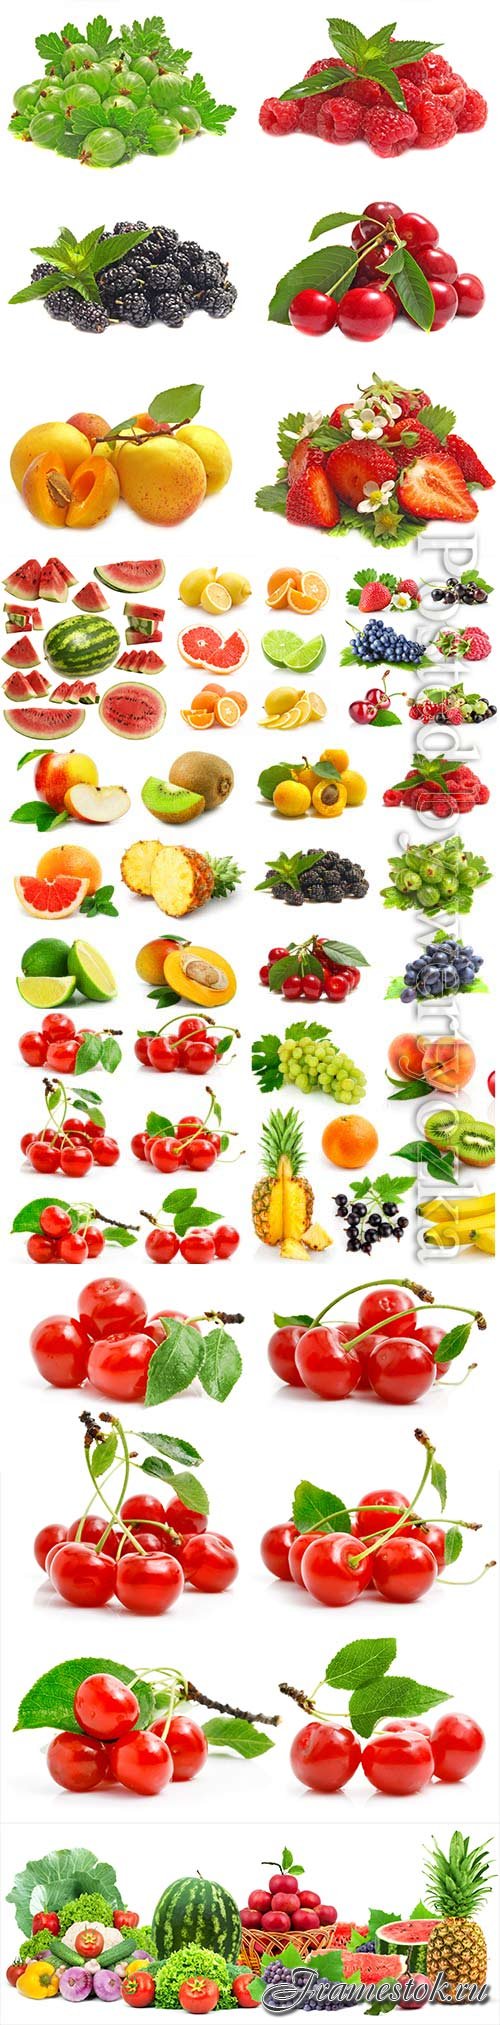 Tropical fruits, berries stock photo